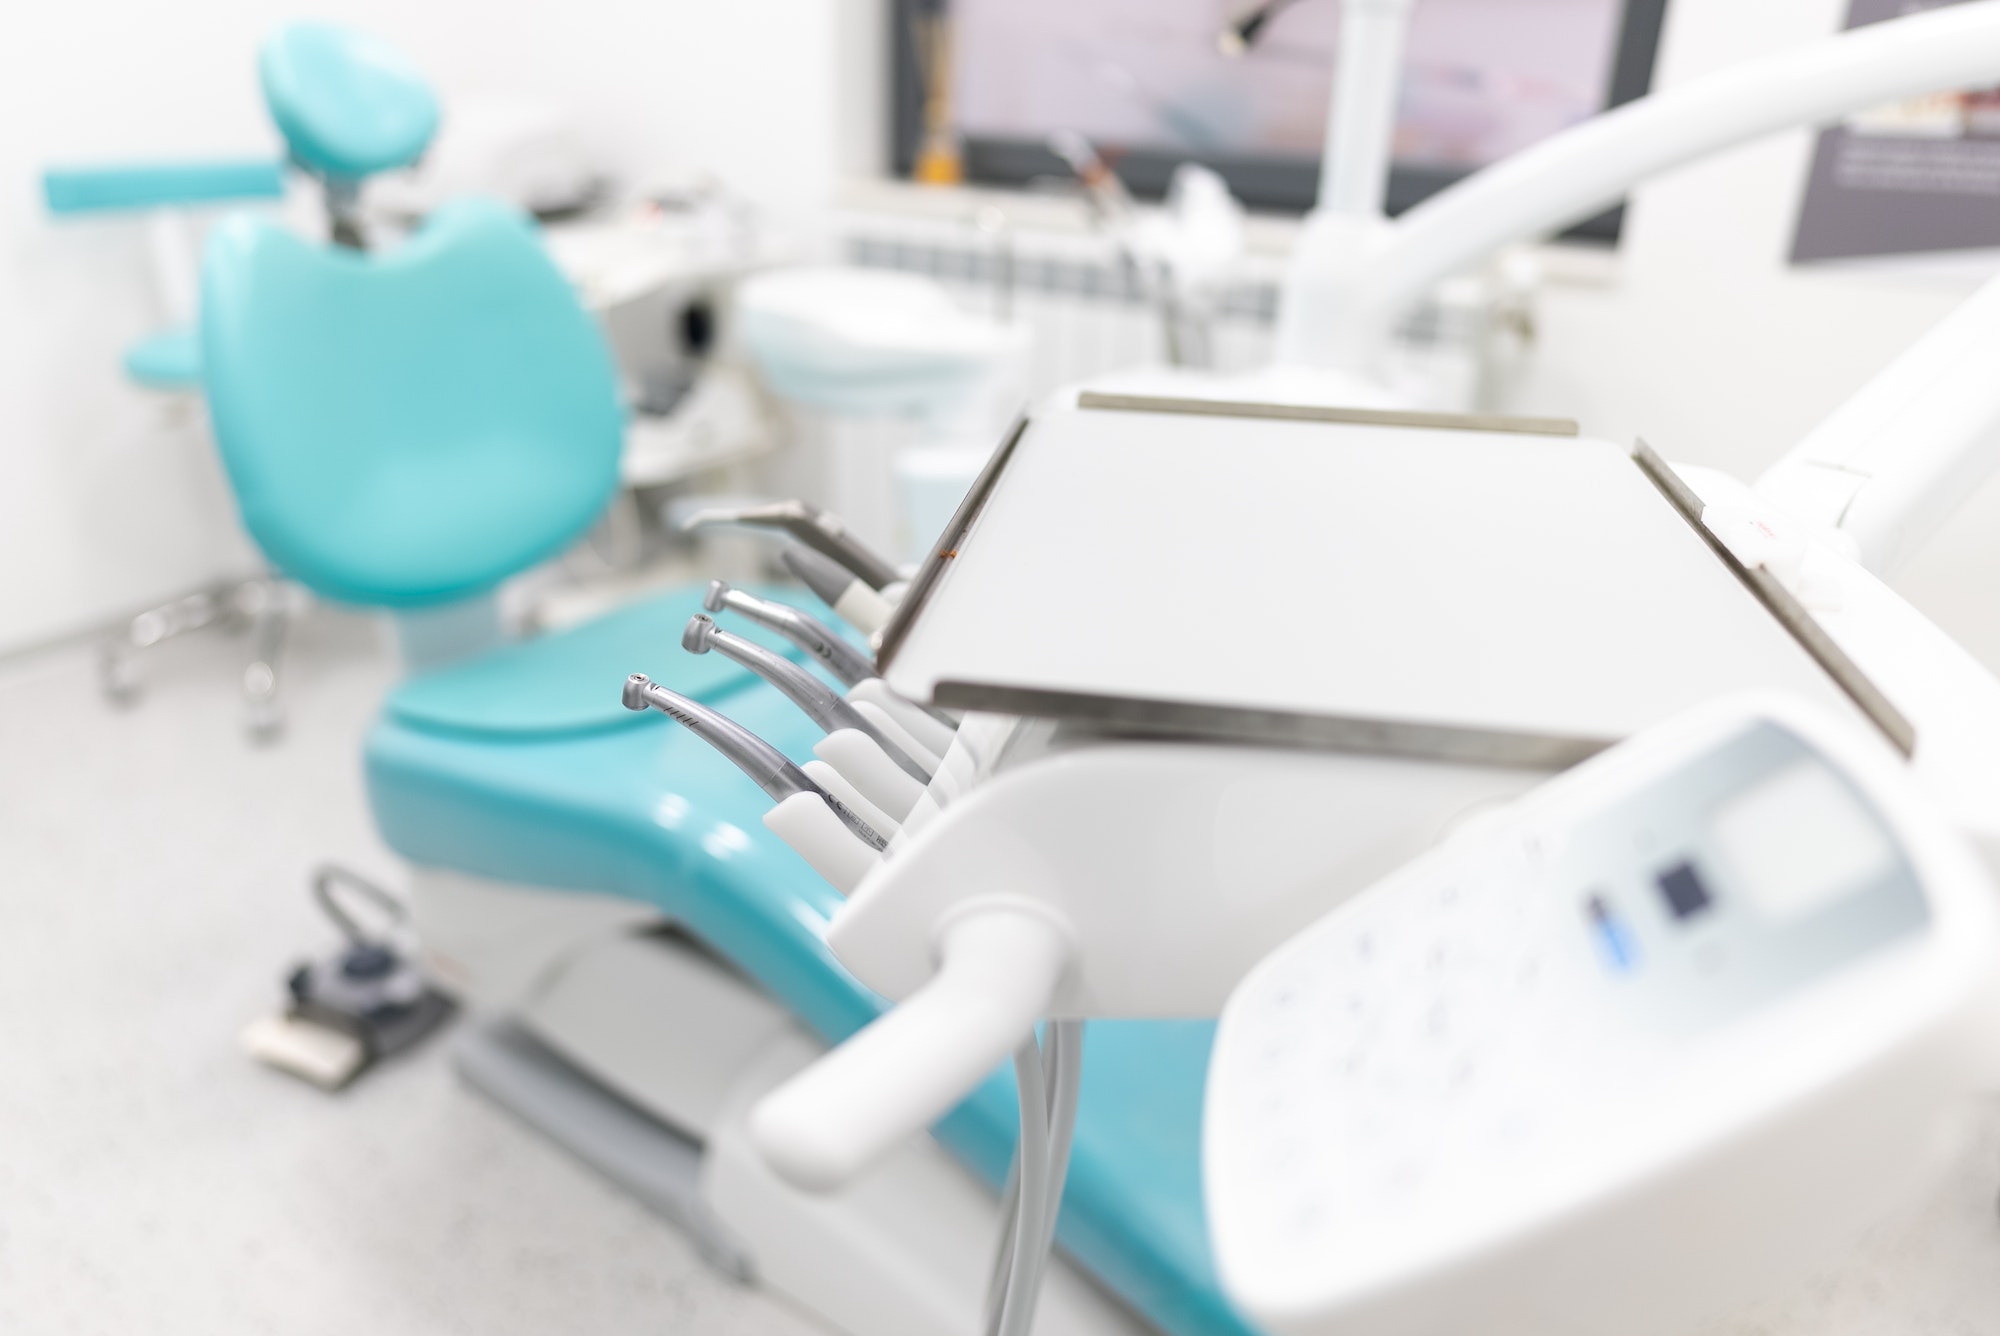 Dentist chair and dentist tools